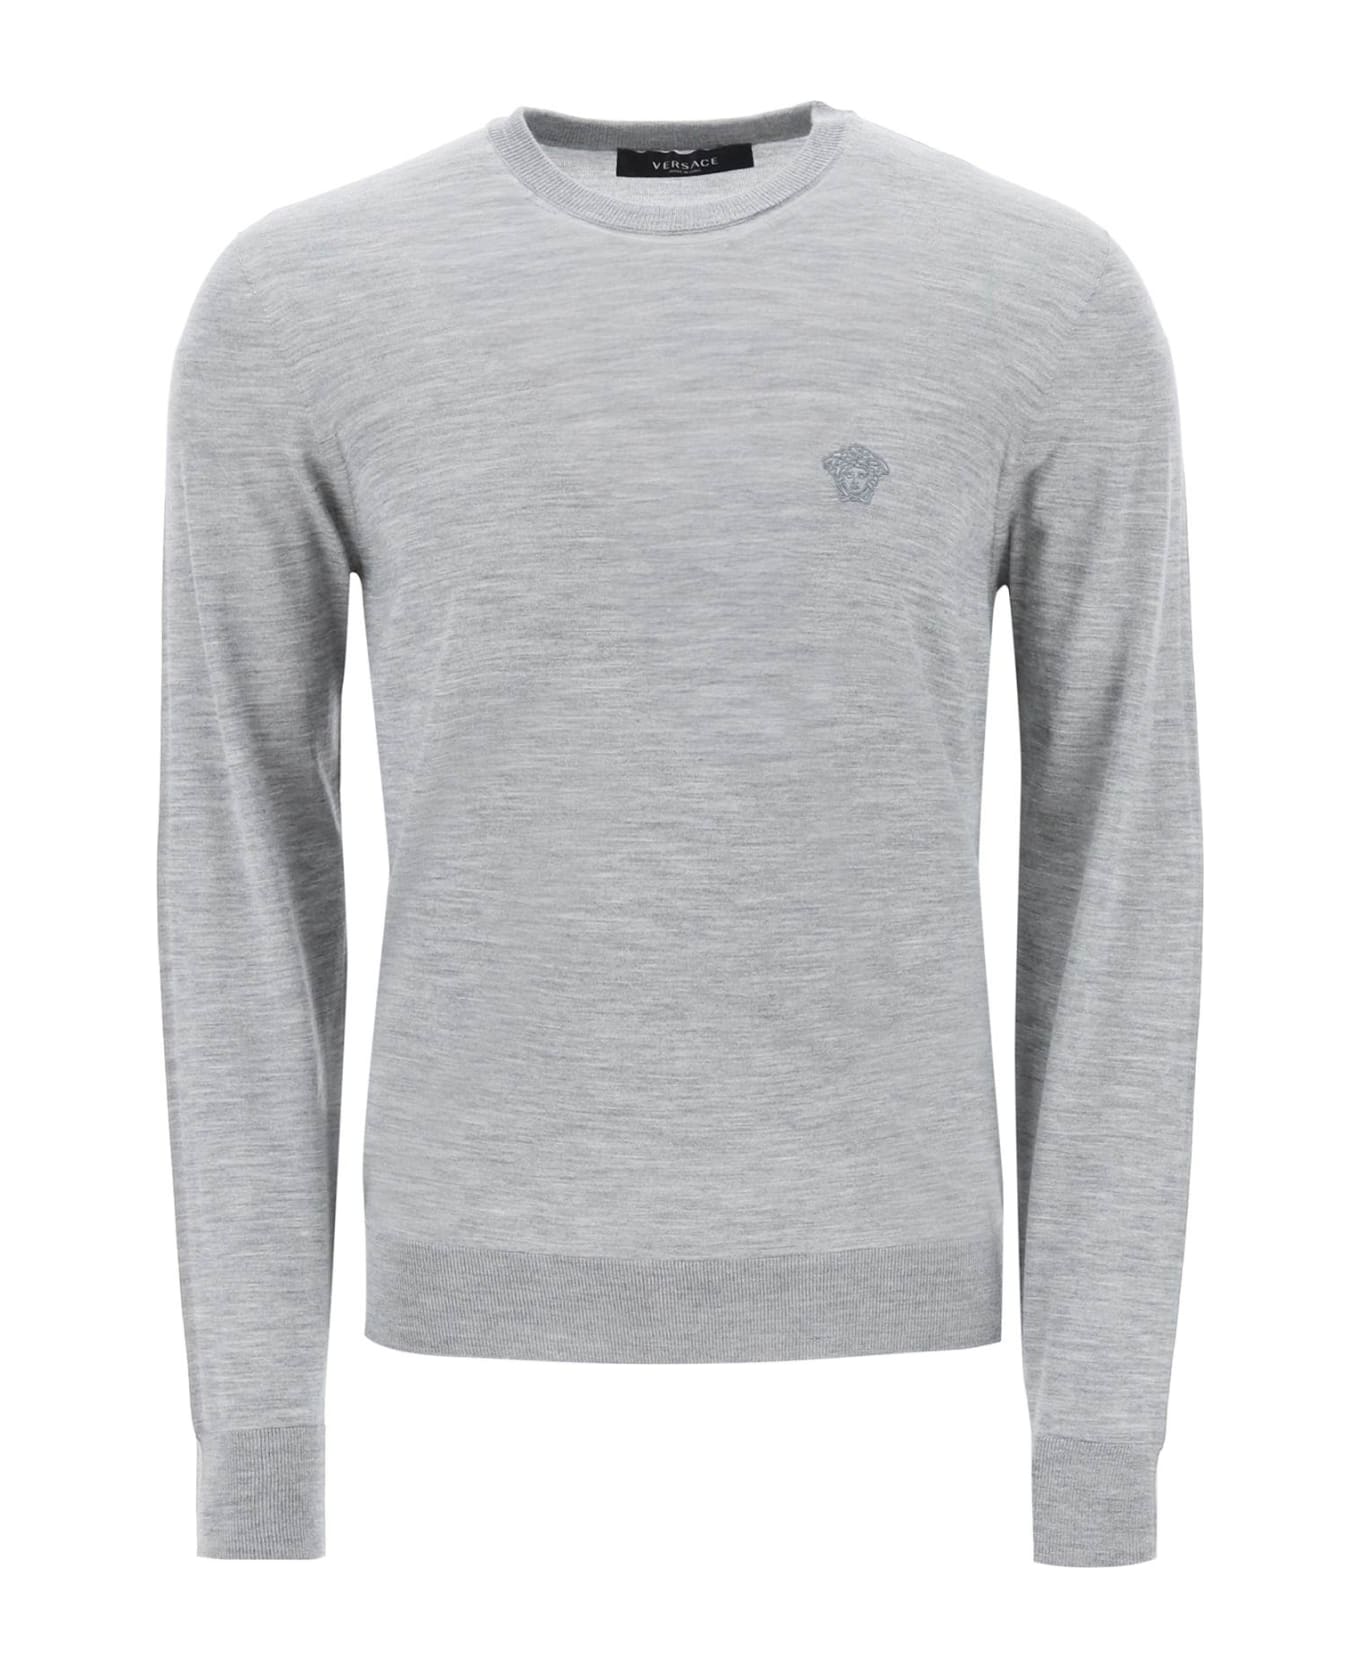 Versace Pullover With Medusa Embroidery - MEDIUM GREY (Grey)